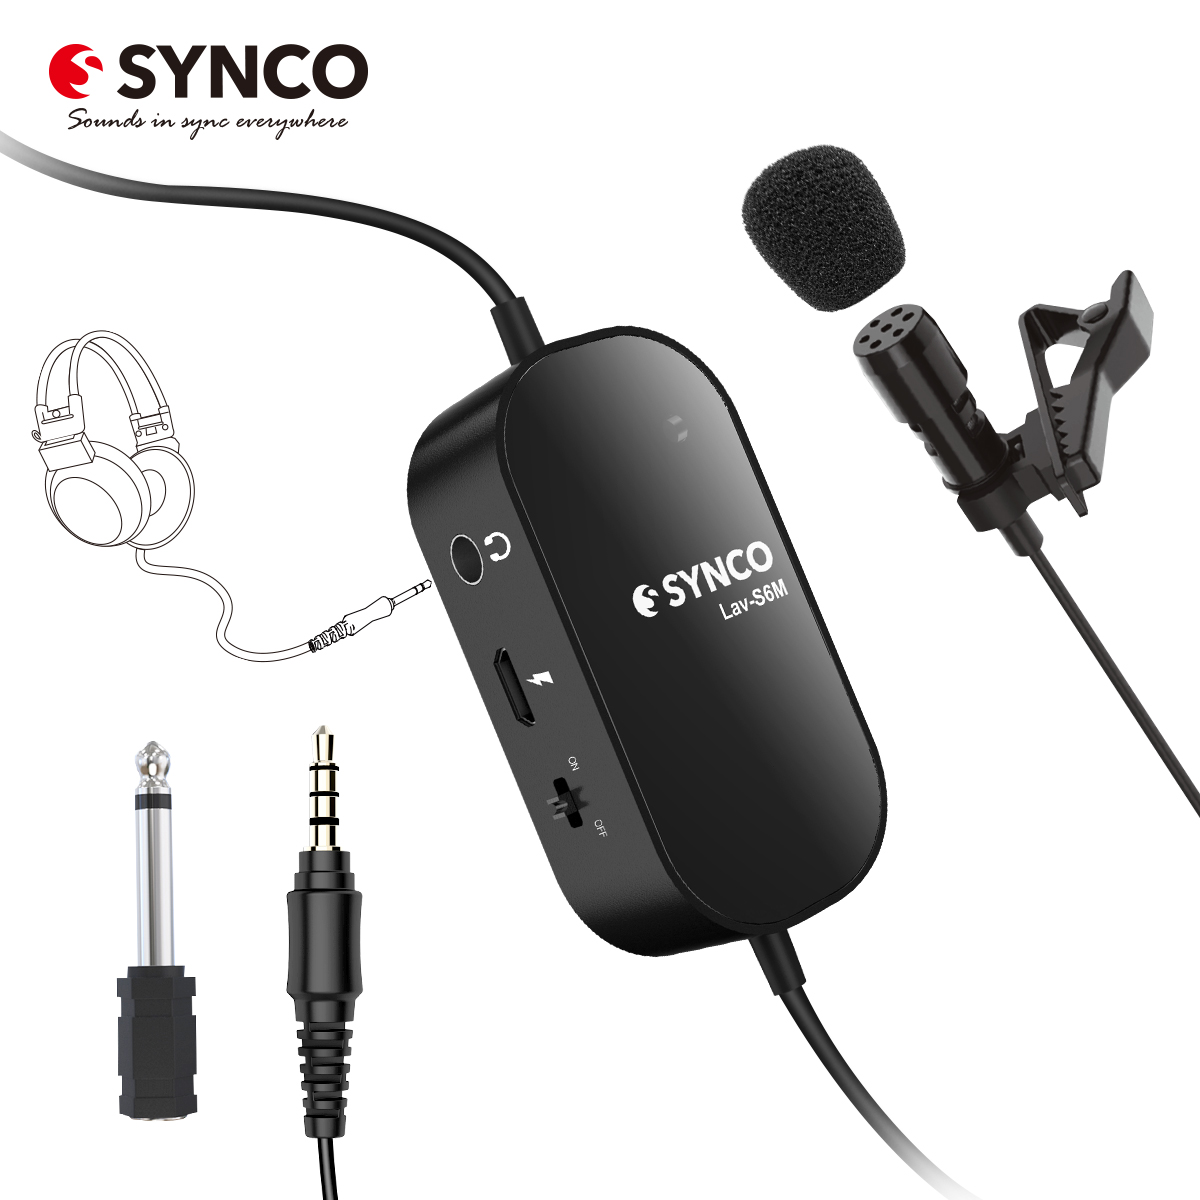 SYNCO Lav-S6M Lavalier Clip-On Lapel Microphone with 3.5Mm Audio Monitoring 6M Cable Omnidirectional Condenser Mic Support USB